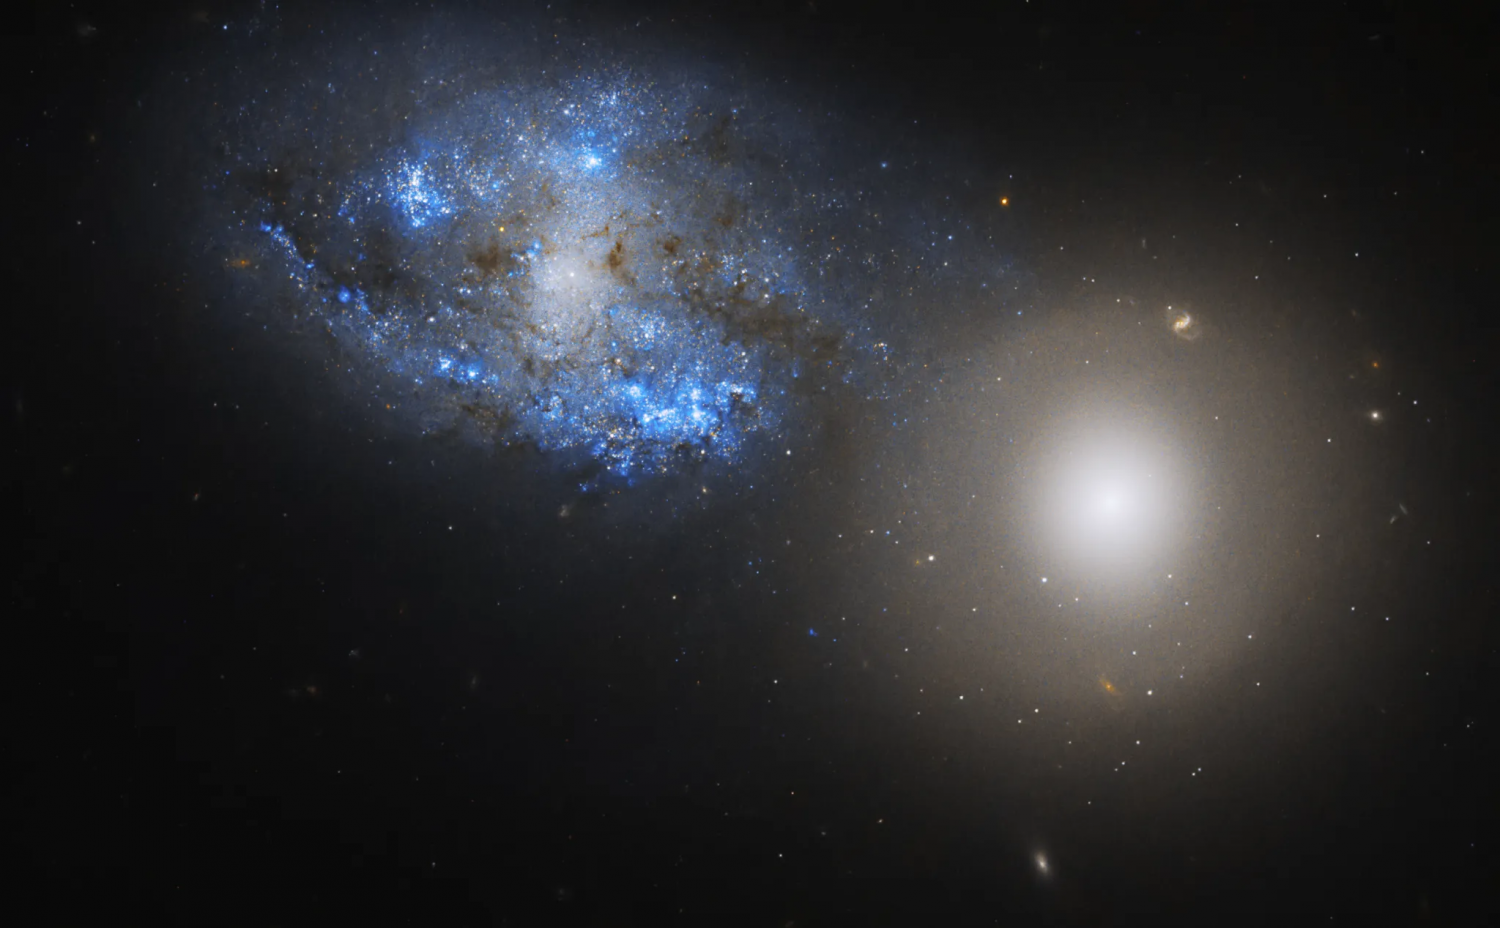 Hubble’s Imaging Records Arp 295